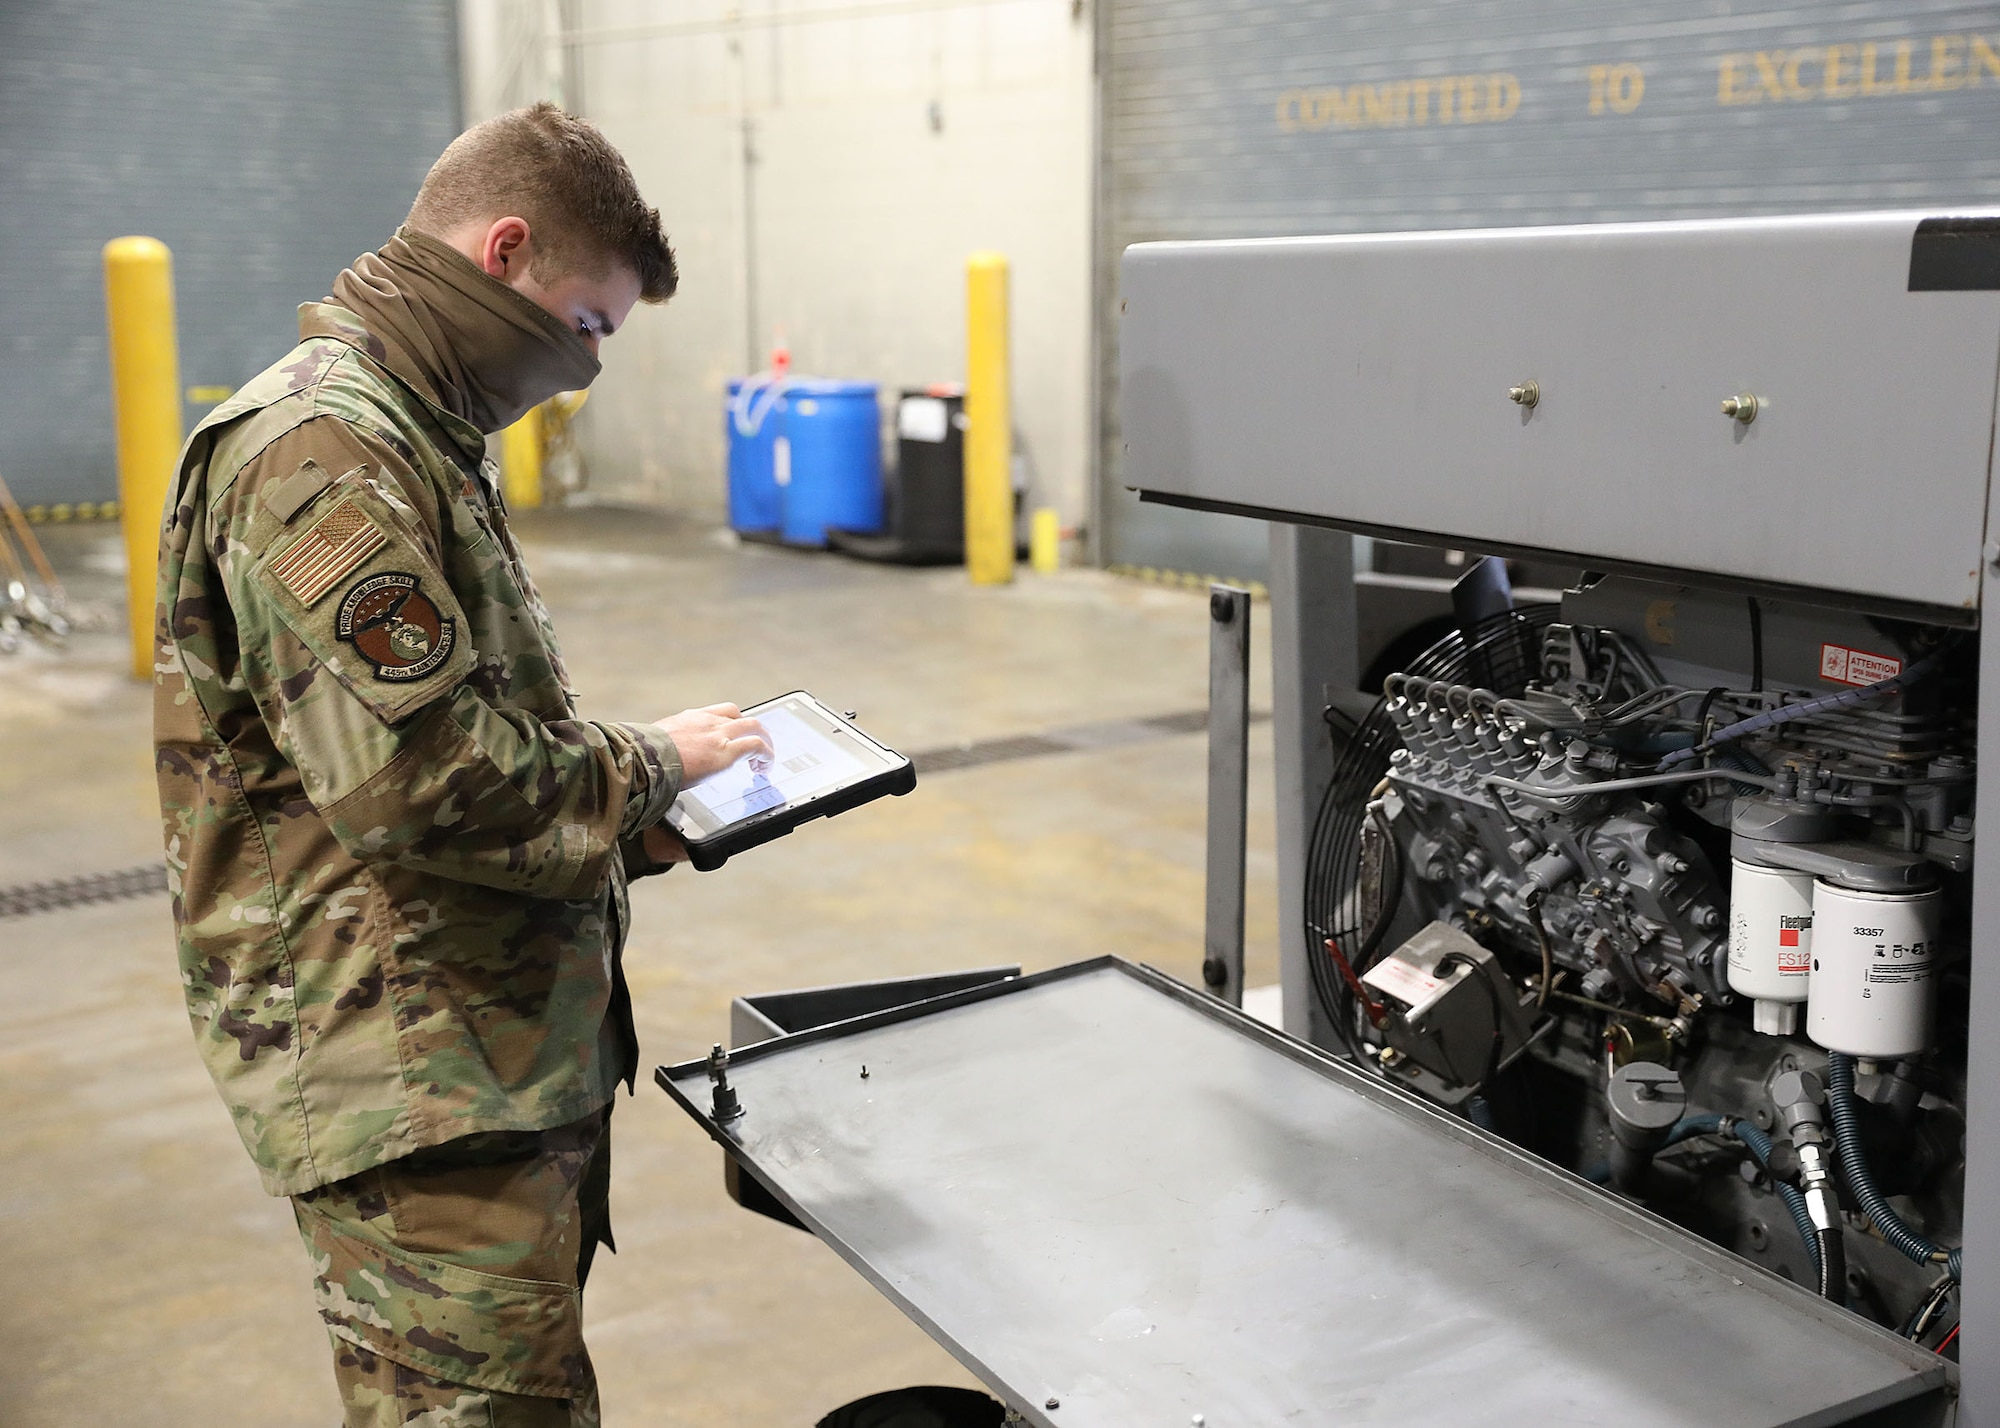 Senior Airman Donald Ledman, an aerospace ground equipment technician with the 445th Maintenance Squadron, prepares to replace the gear cover gasket on a B809 generator, April 11, 2021, at Wright-Patterson Air Force Base, Ohio.